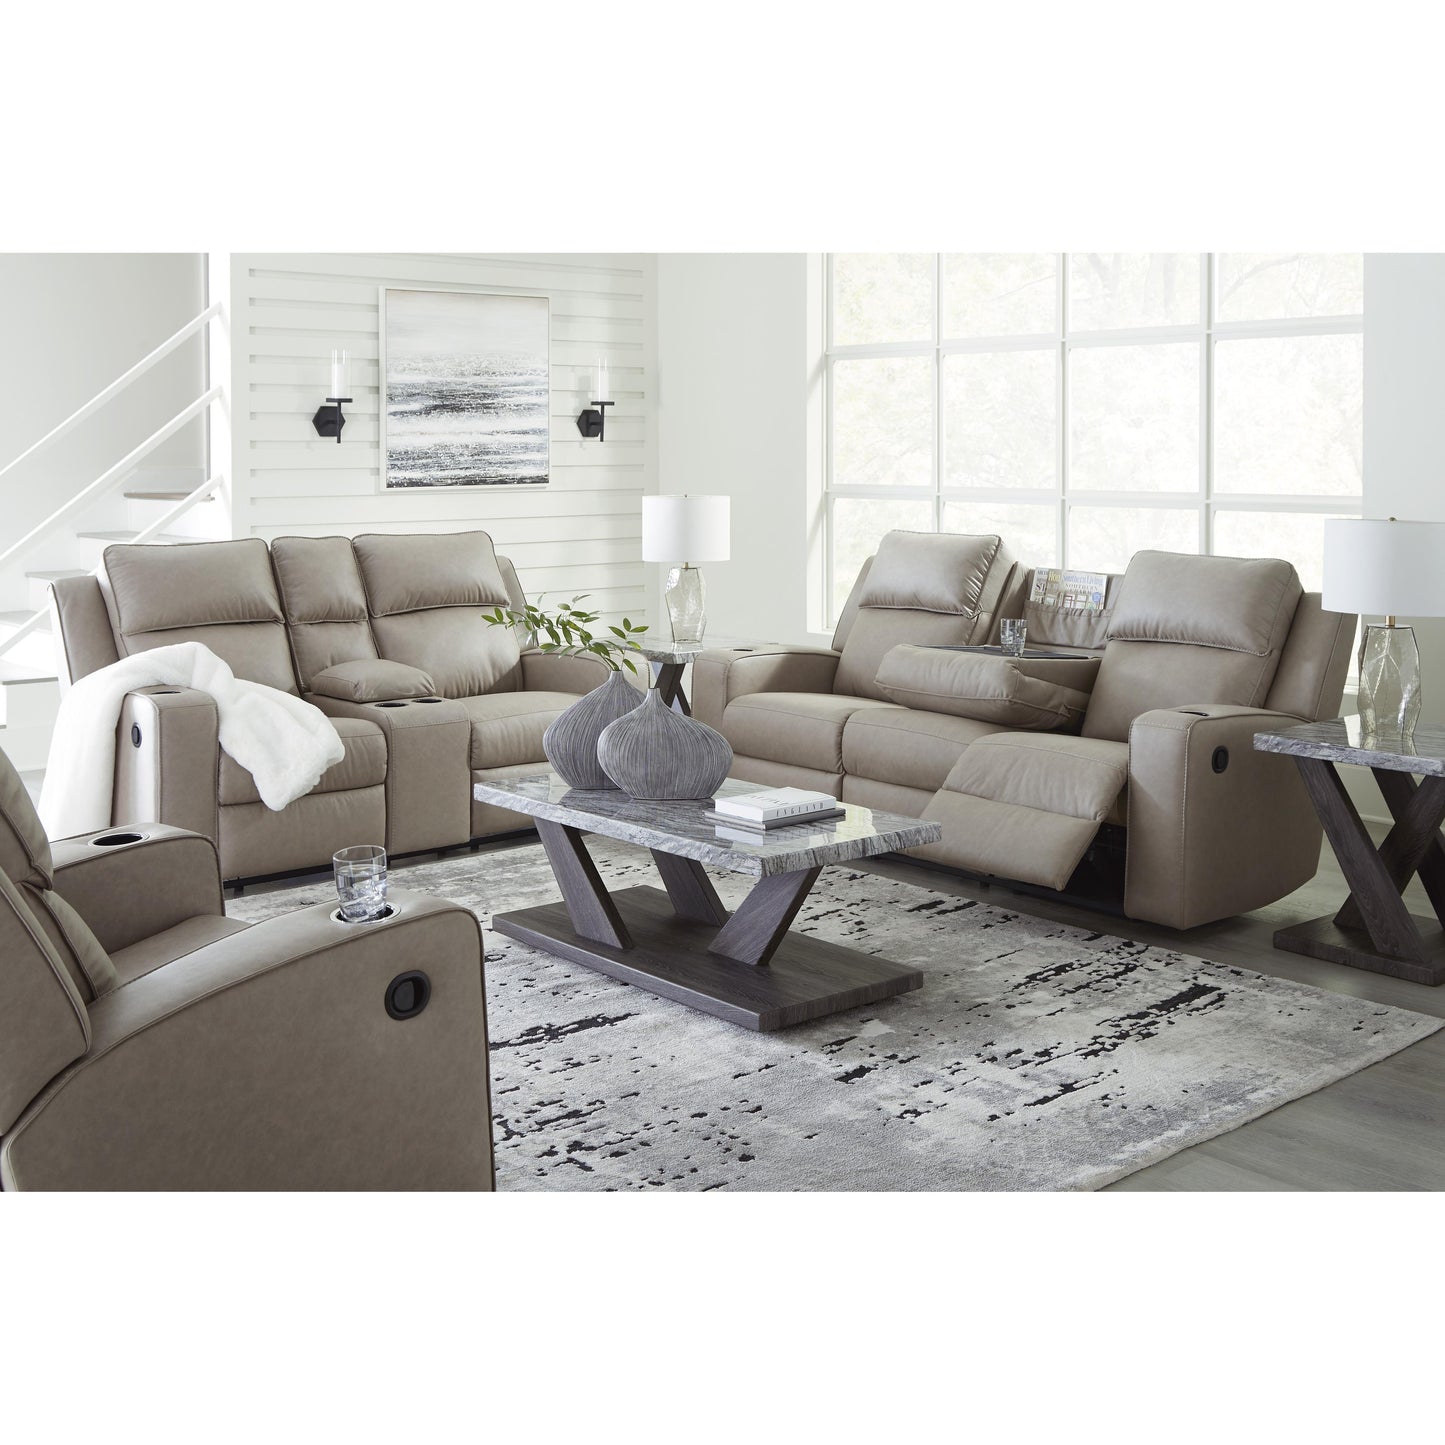 Signature Design by Ashley Lavenhorne Reclining Leather Look Loveseat 6330794 IMAGE 15